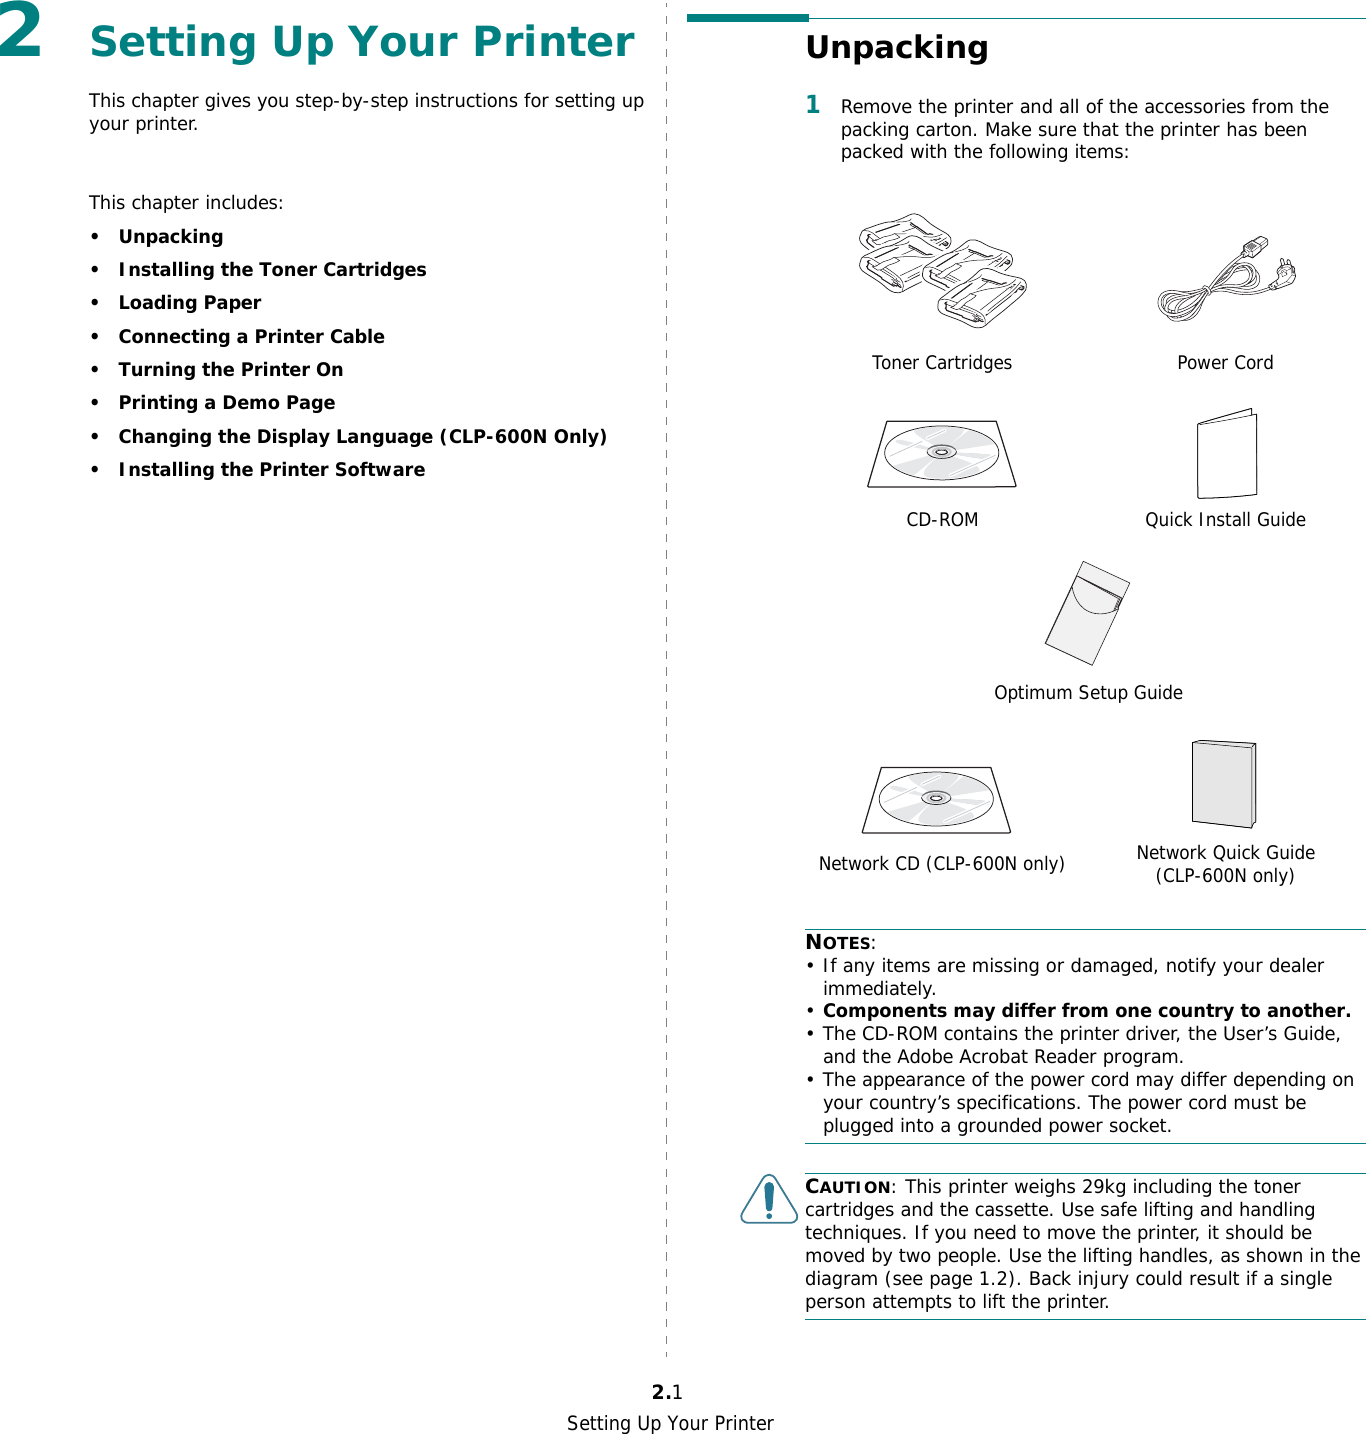 Setting Up Your Printer2.12Setting Up Your PrinterThis chapter gives you step-by-step instructions for setting up your printer.This chapter includes:•Unpacking• Installing the Toner Cartridges•Loading Paper• Connecting a Printer Cable• Turning the Printer On• Printing a Demo Page• Changing the Display Language (CLP-600N Only)• Installing the Printer SoftwareUnpacking1Remove the printer and all of the accessories from the packing carton. Make sure that the printer has been packed with the following items:NOTES:• If any items are missing or damaged, notify your dealer immediately. •Components may differ from one country to another.• The CD-ROM contains the printer driver, the User’s Guide, and the Adobe Acrobat Reader program.• The appearance of the power cord may differ depending on your country’s specifications. The power cord must be plugged into a grounded power socket.CAUTION: This printer weighs 29kg including the toner cartridges and the cassette. Use safe lifting and handling techniques. If you need to move the printer, it should be moved by two people. Use the lifting handles, as shown in the diagram (see page 1.2). Back injury could result if a single person attempts to lift the printer.Toner Cartridges Power CordCD-ROM Quick Install GuideOptimum Setup GuideNetwork CD (CLP-600N only) Network Quick Guide (CLP-600N only)